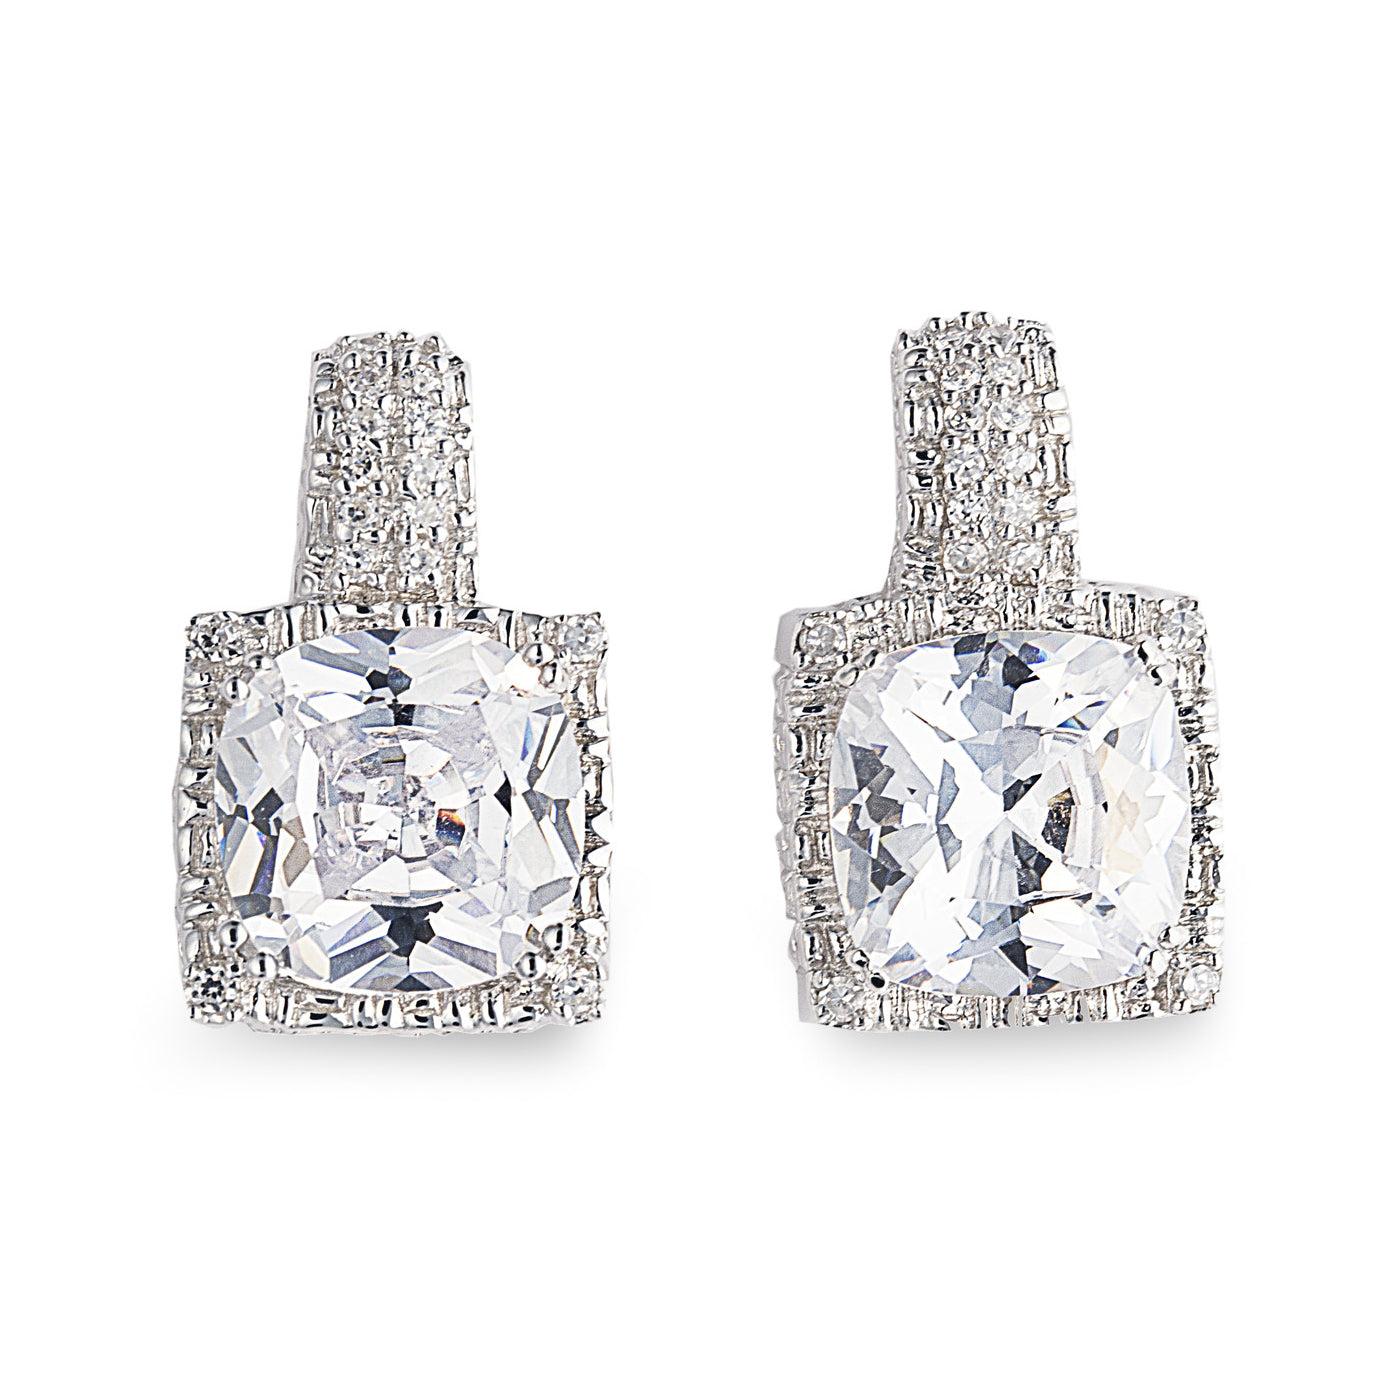 Parisian-inspired Regina Drop Earrings are made of 925 sterling silver and feature a showy 'princess cut' cubic zirconia stone surrounded by a woven silver design. Jewellery by Bellagio & Co. Worldwide shipping.